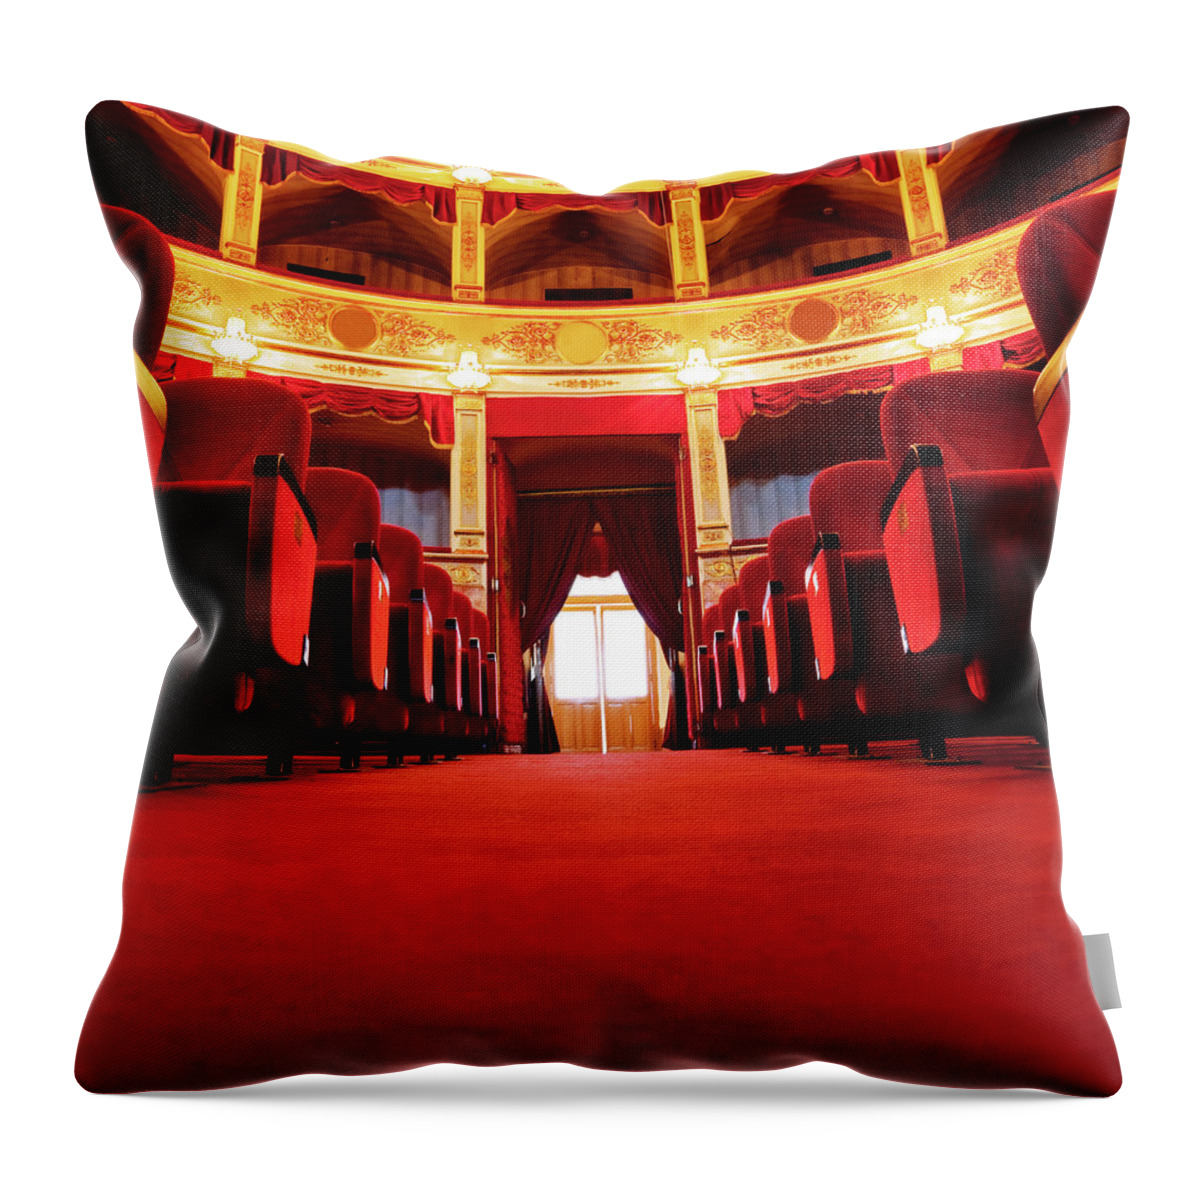 Event Throw Pillow featuring the photograph Beautiful Theatre by Nikada